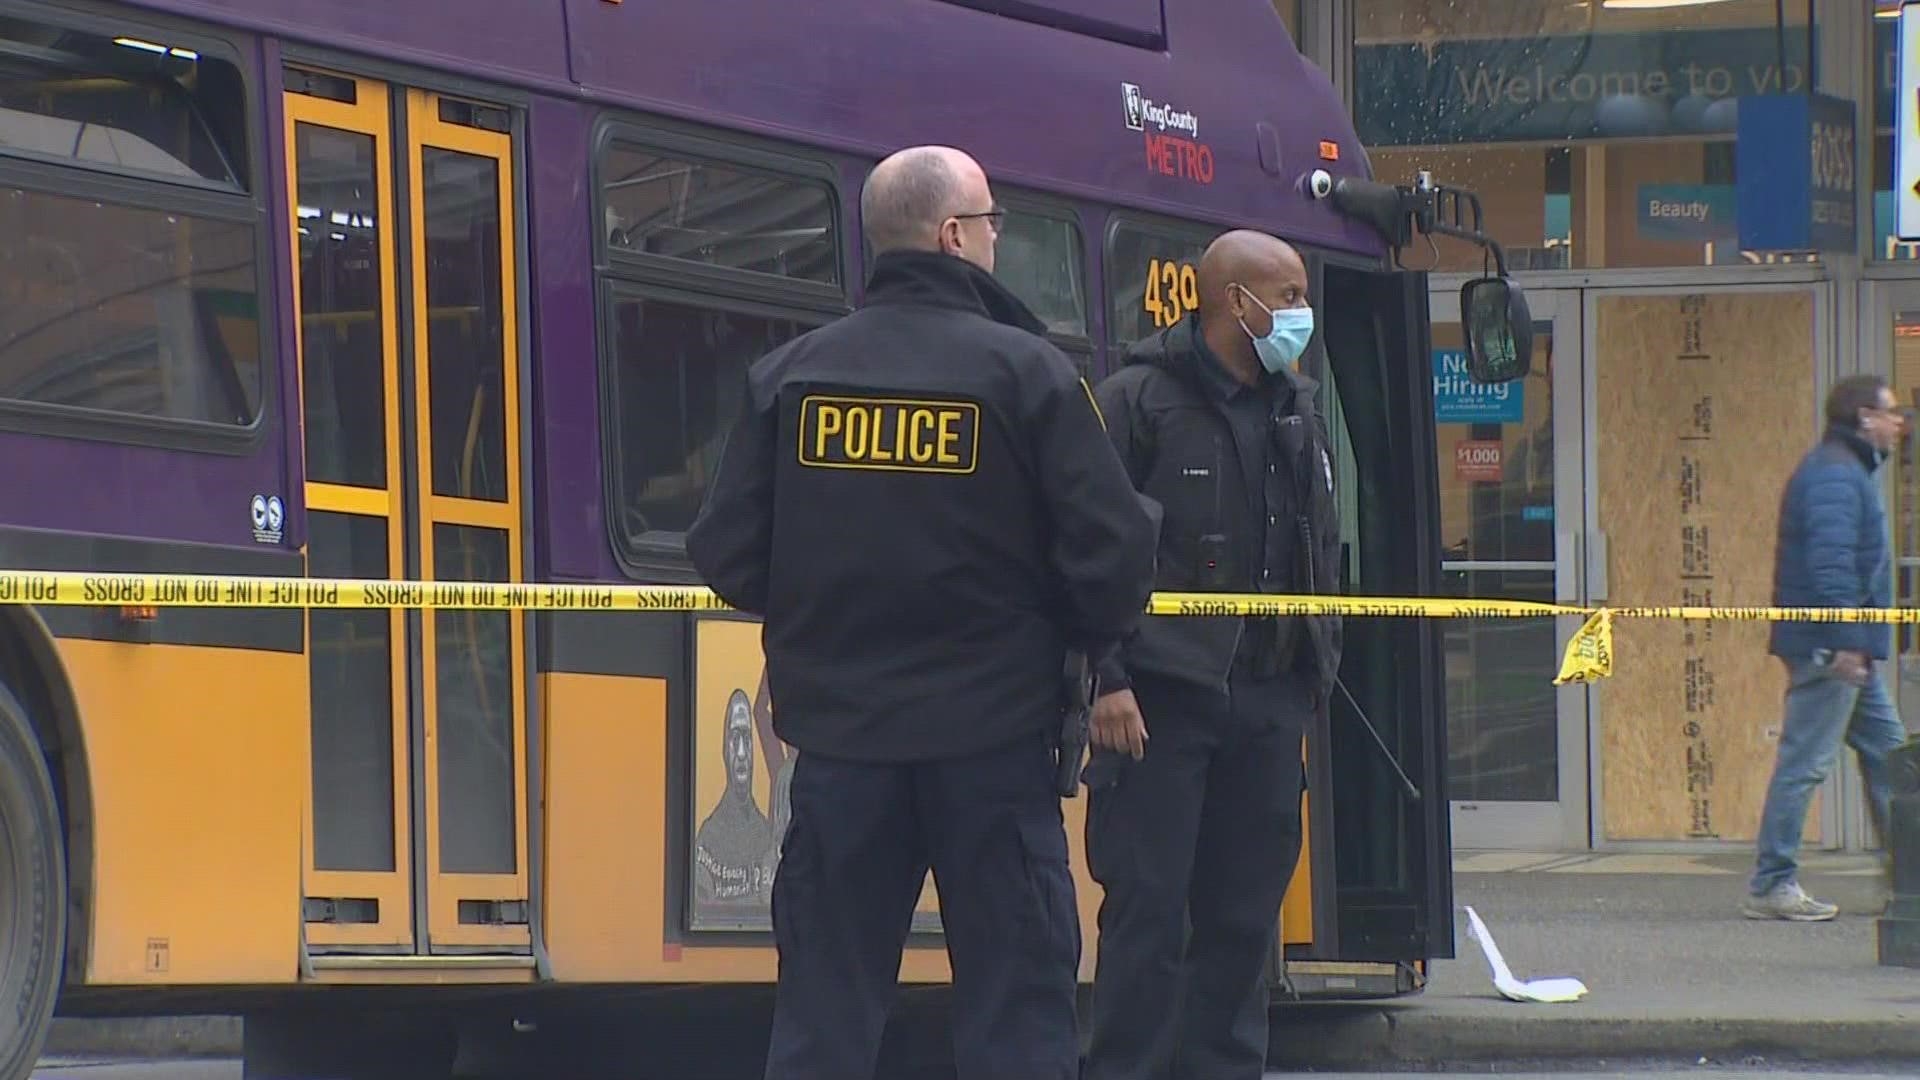 One person was shot in the hip near 3rd Avenue and Pike Street according to the Seattle Police Department.